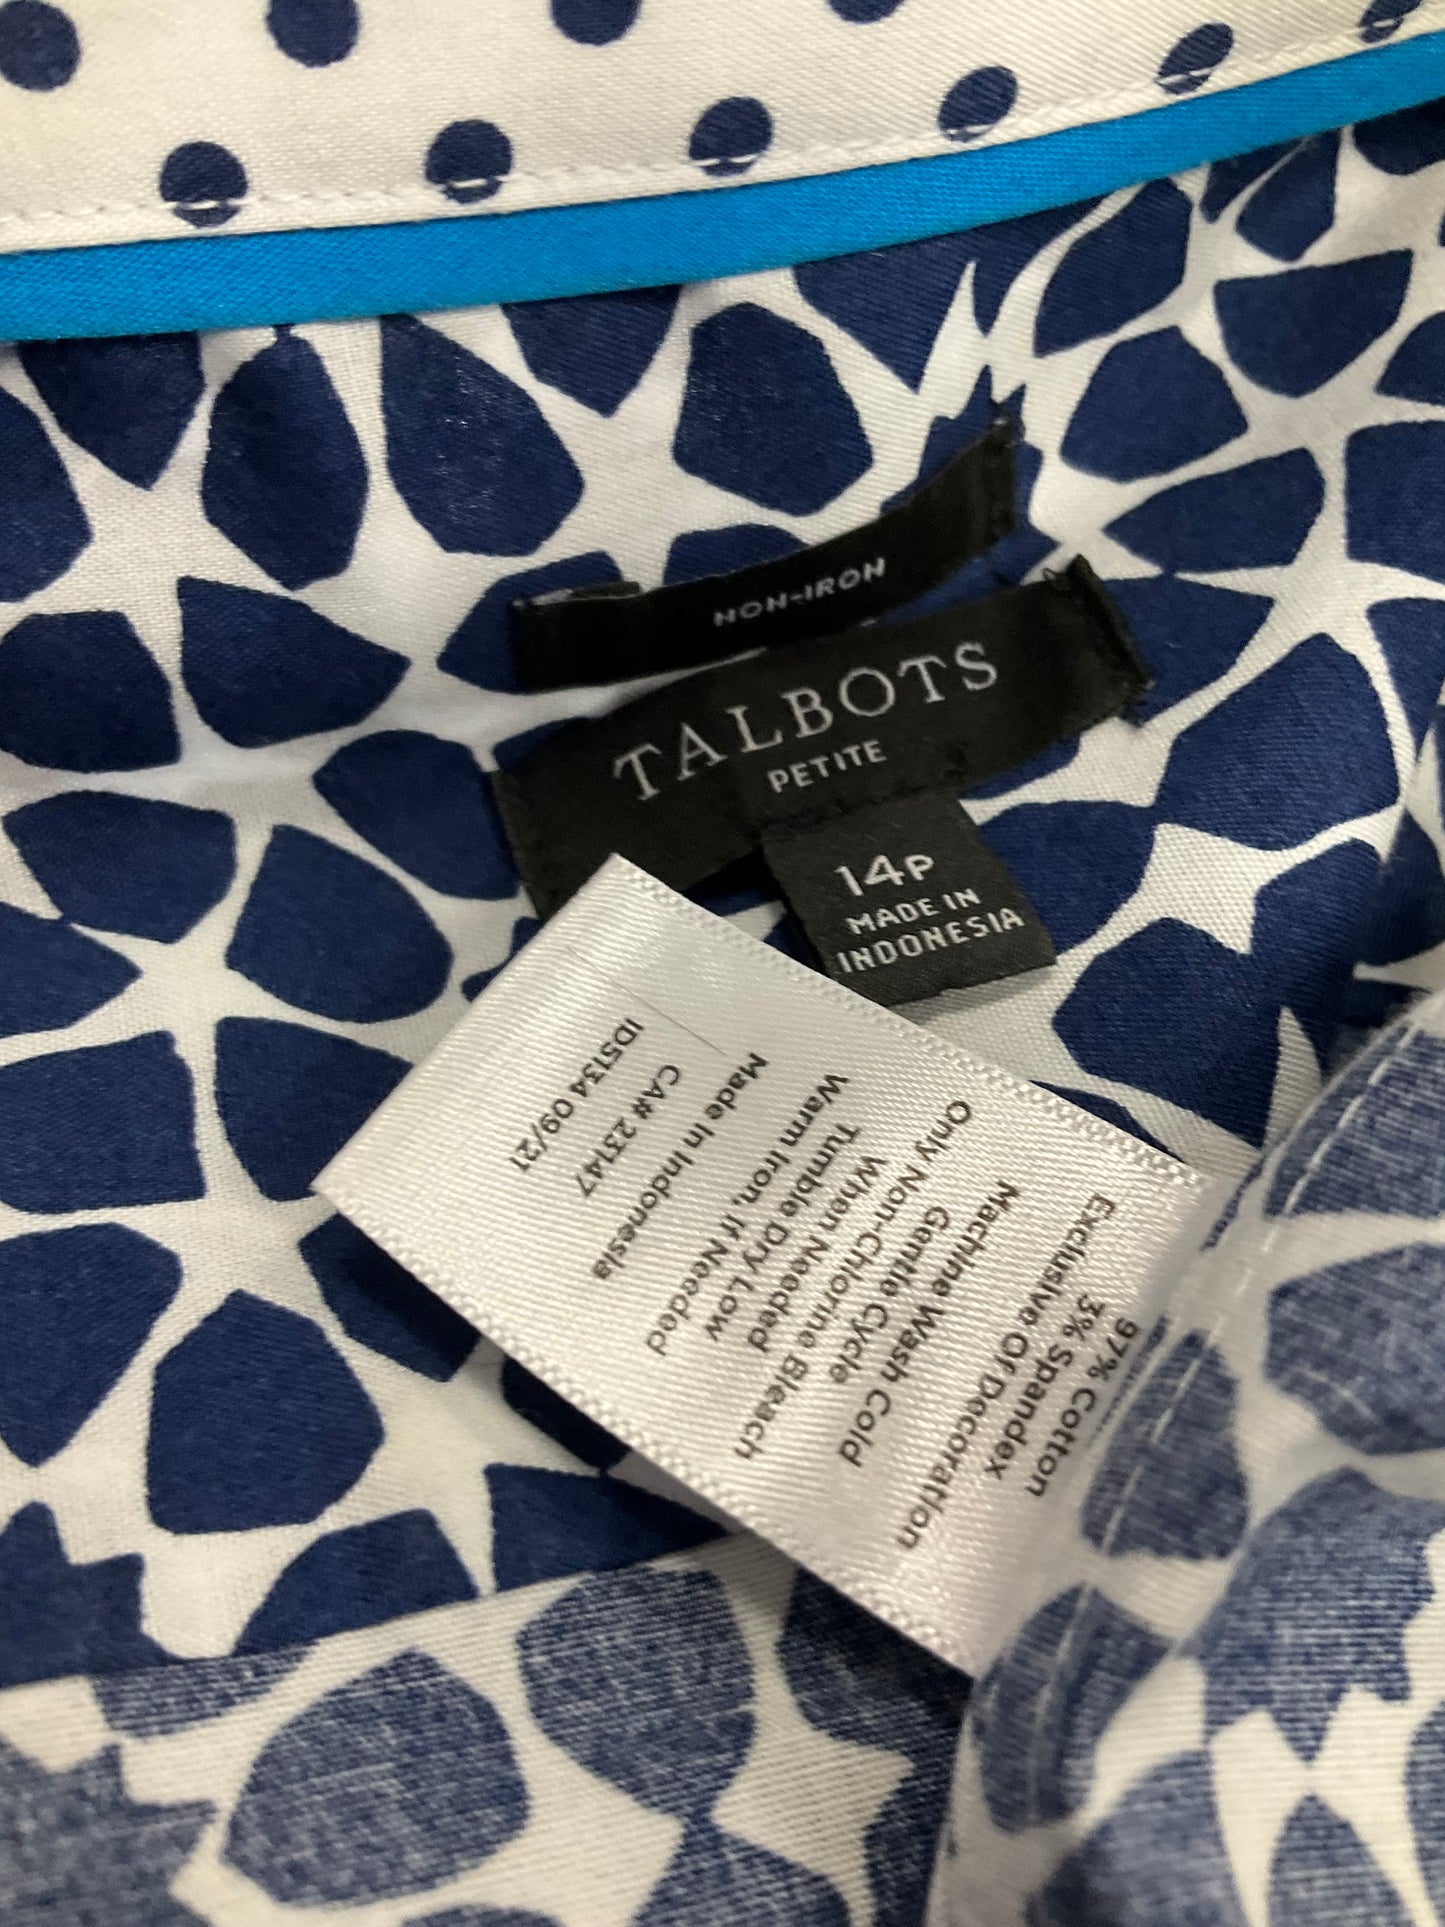 Top Sleeveless By Talbots  Size: 14petite